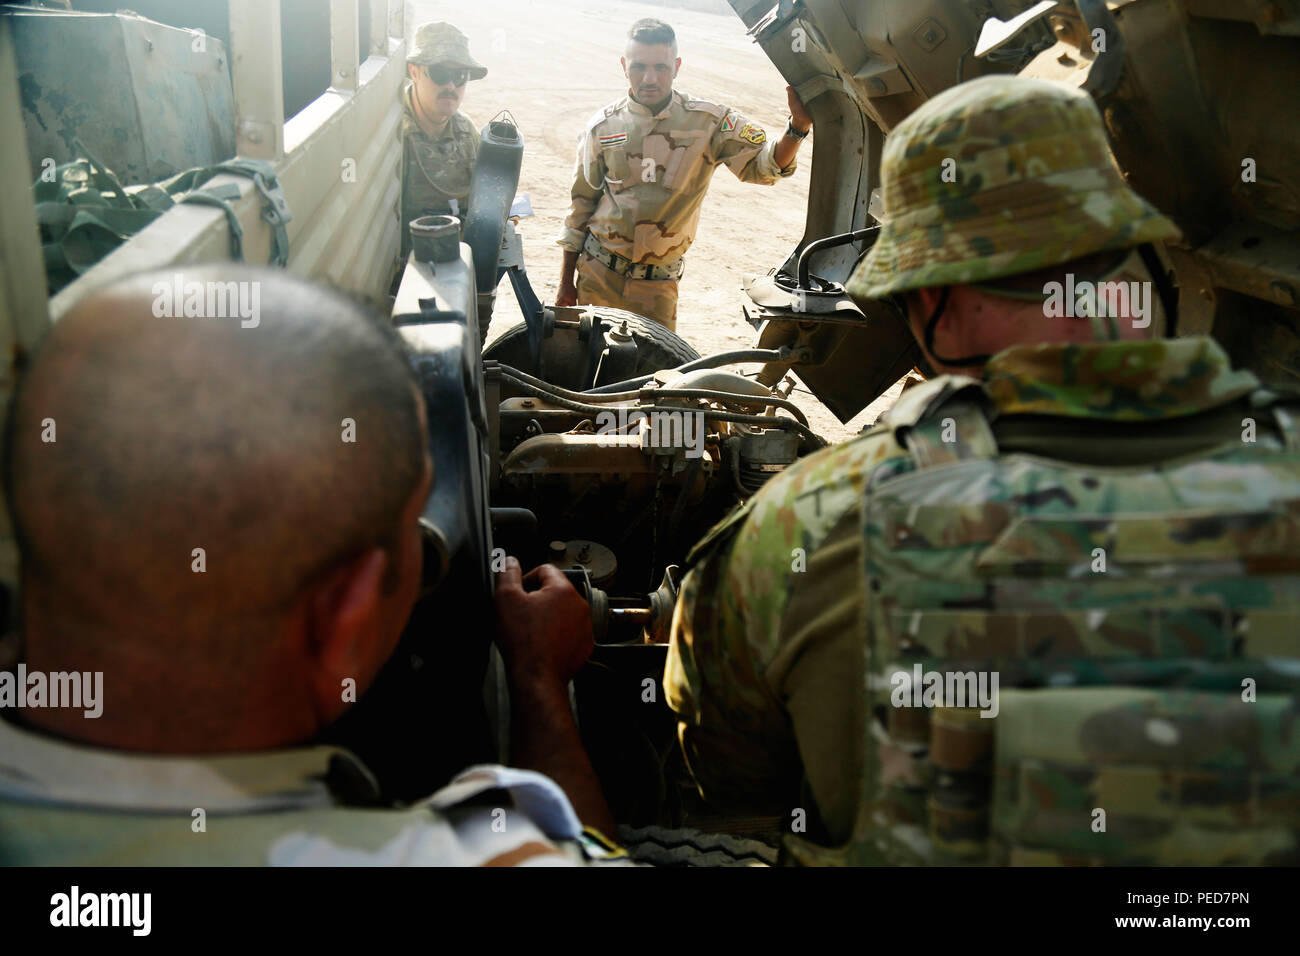 Australian soldiers assigned to Task Group Taji perform a vehicle inspection at Camp Taji, Iraq, Aug. 2, 2015. Through advise and assist and building partner capacity missions, the Combined Joint Task Force – Operation Inherent Resolve’s multinational coalition has trained more than 11,000 Iraqi security force personnel to defeat the Islamic State of Iraq and the Levant. A coalition of nations have joined together to enable Iraqi forces to counter ISIL, reestablish Iraq’s borders and retake lost terrain thereby restoring regional stability and security. (U.S. Army photo by Spc. William Marlow/ Stock Photo